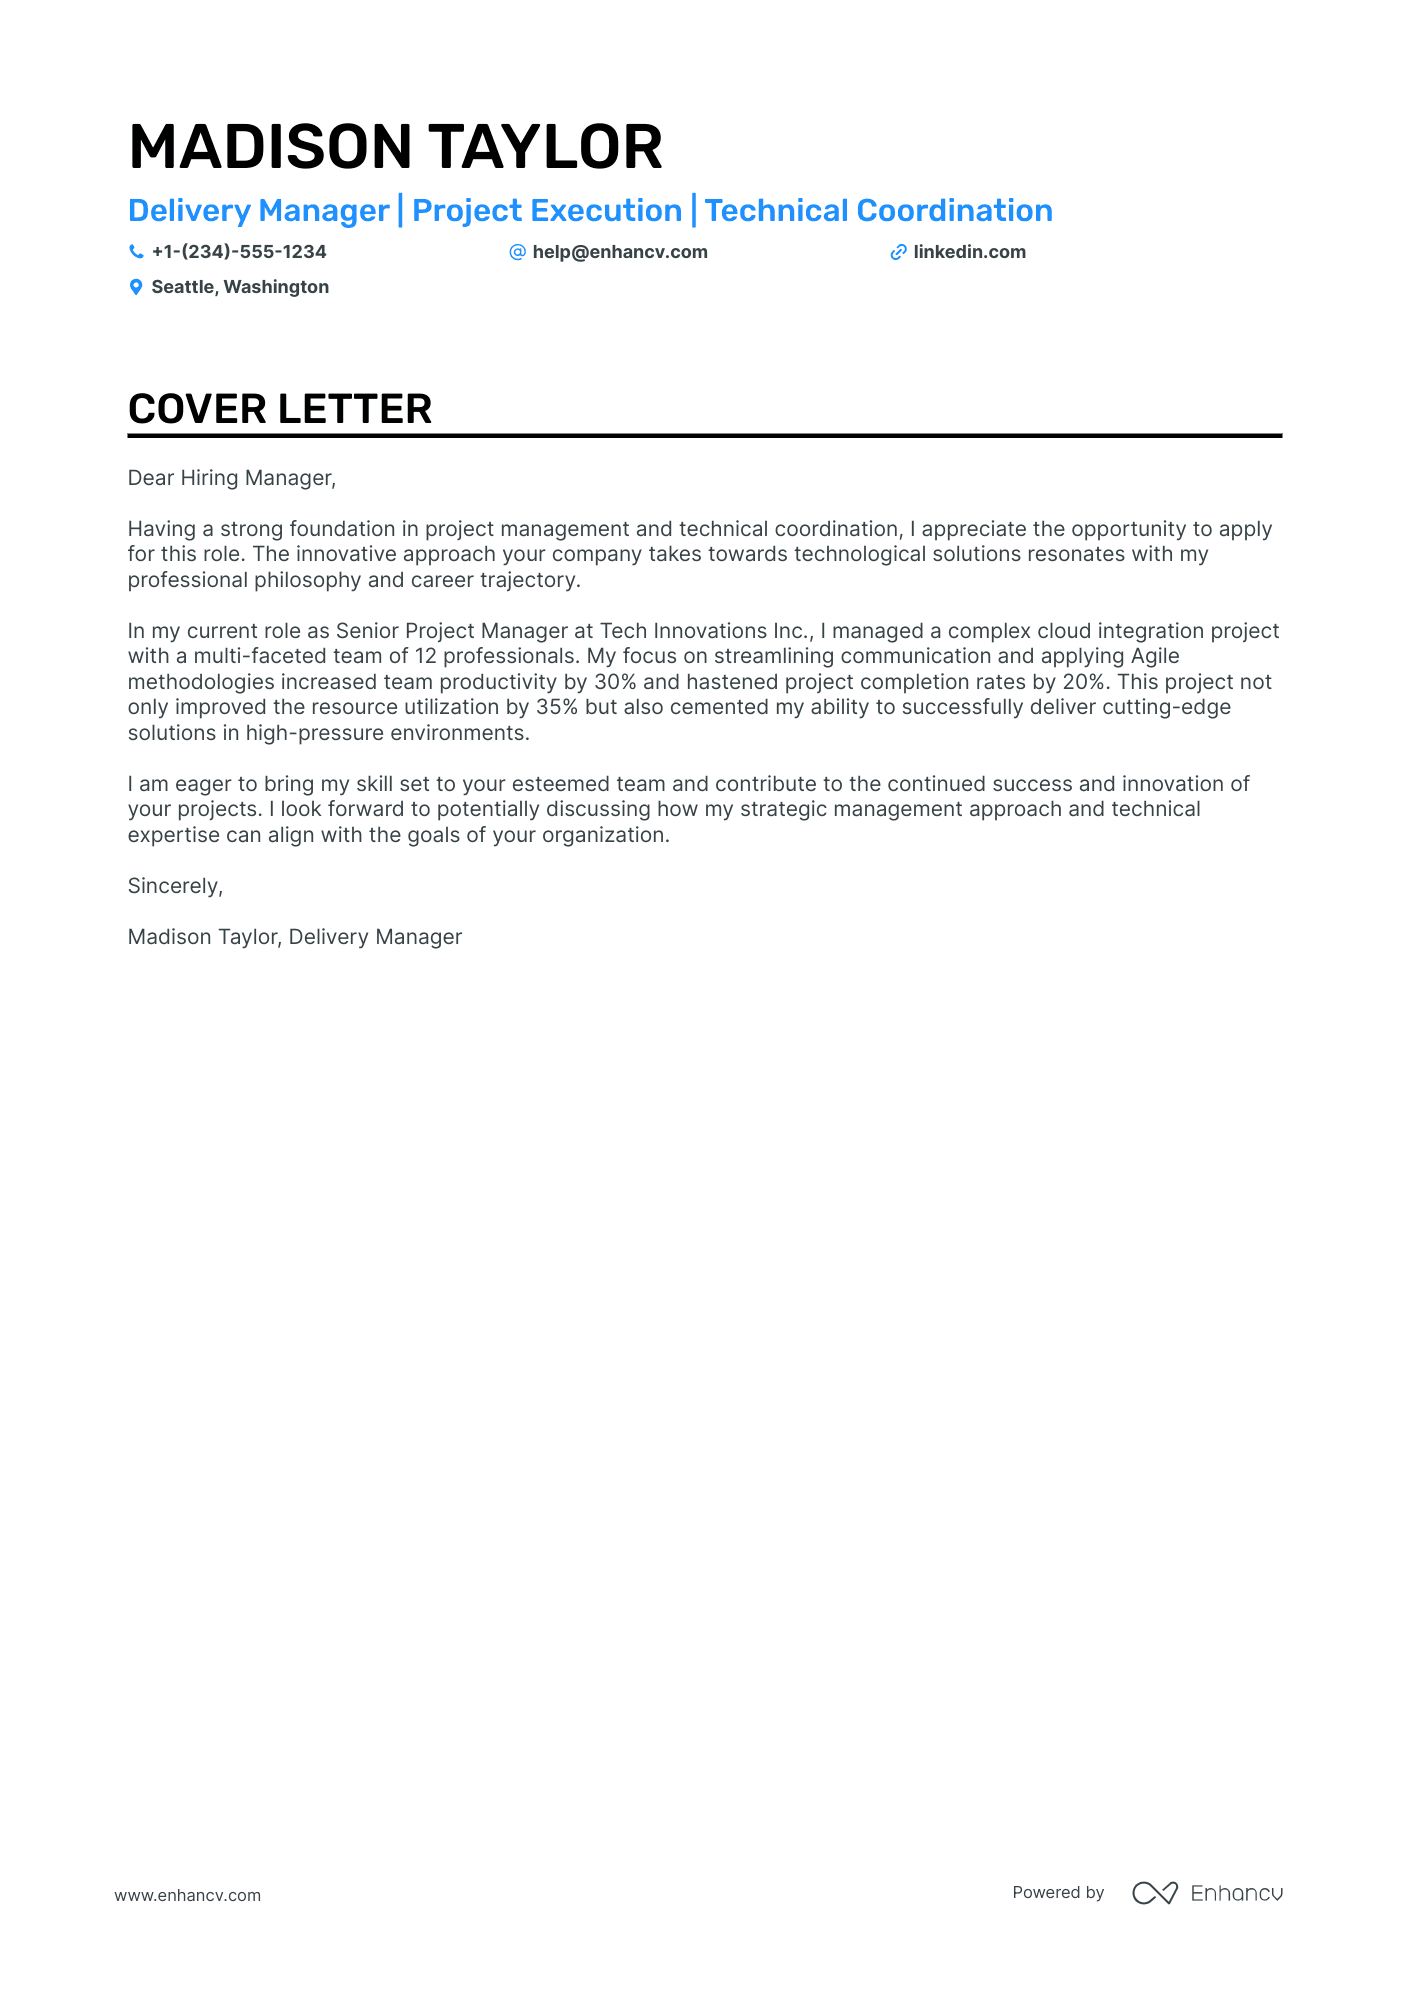 Delivery Manager cover letter